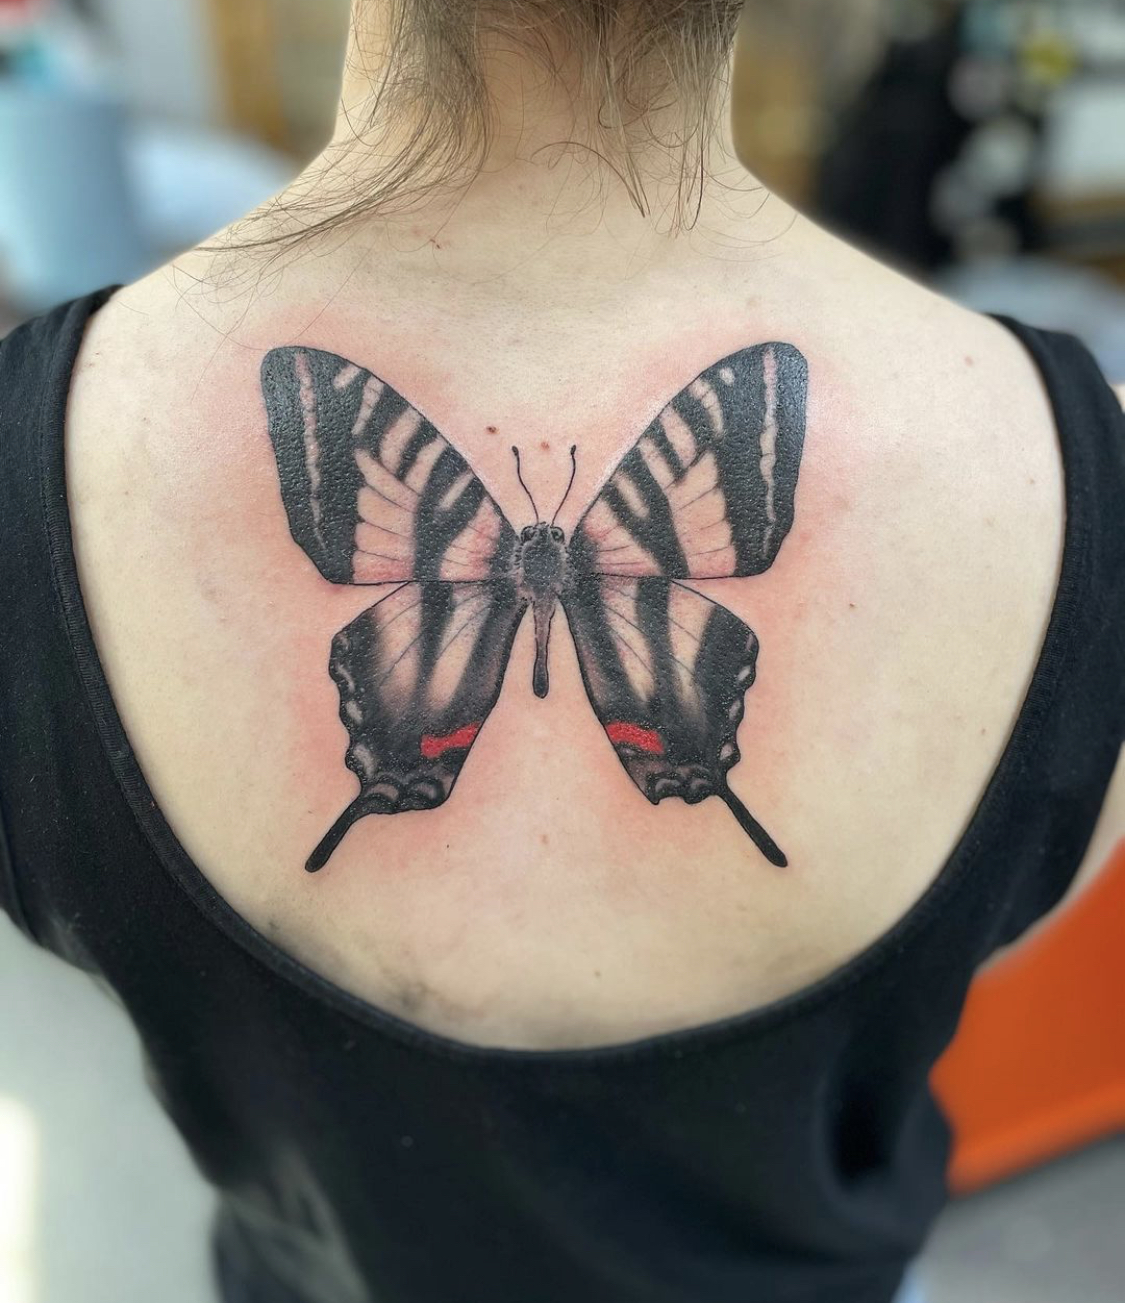 Butterfly by Brian | Living Arts Tattoo, New Hope, Pa.